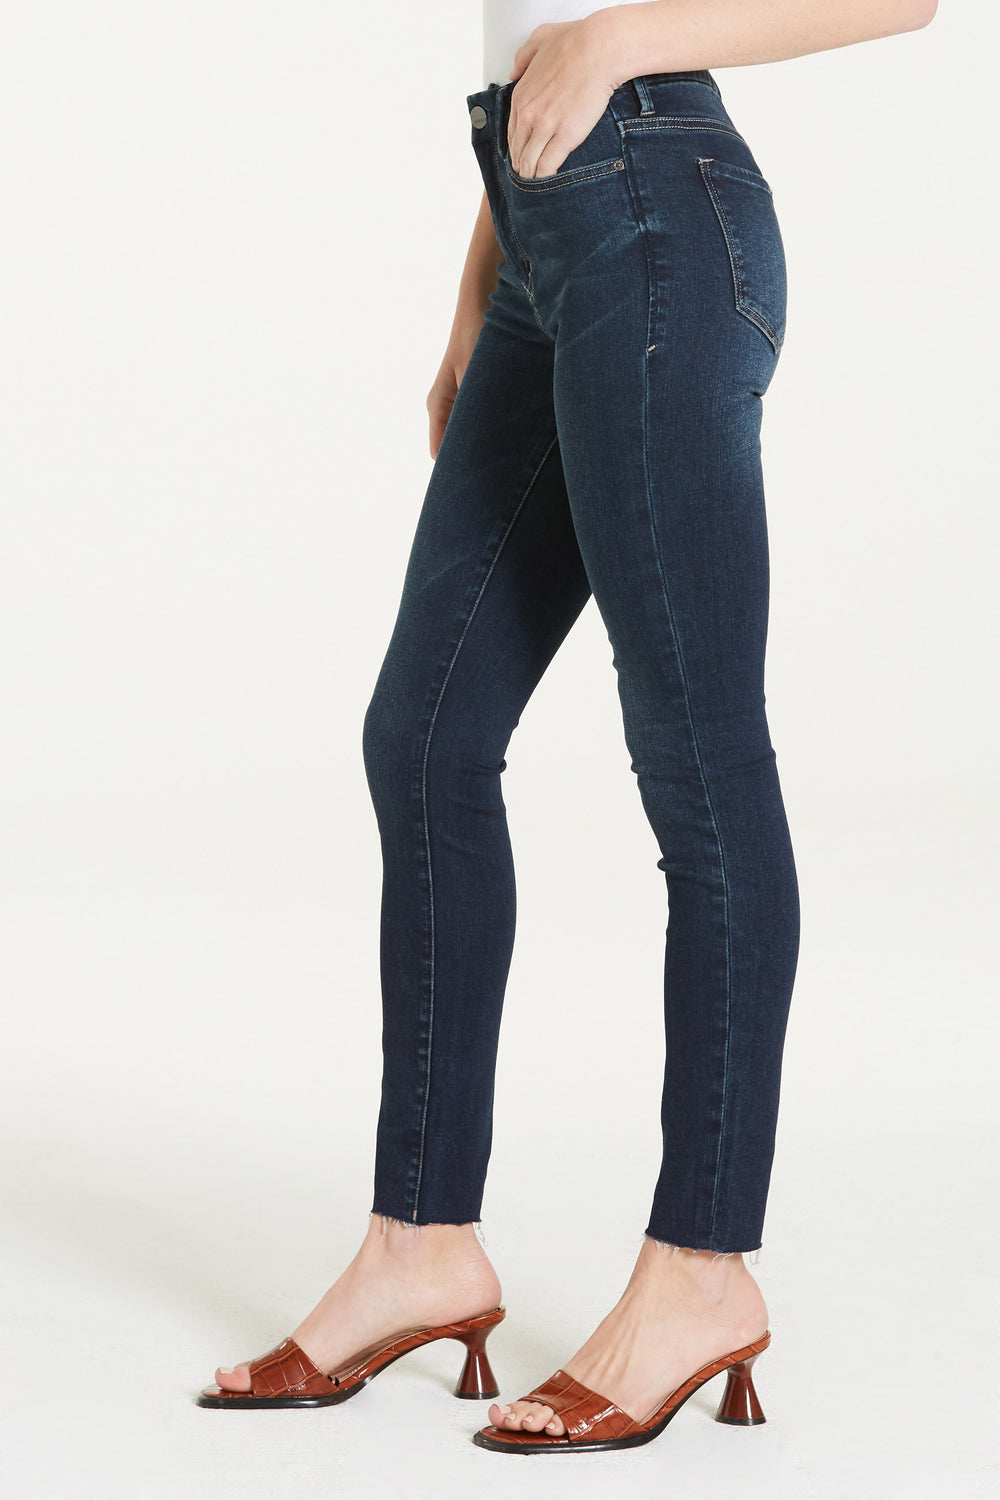 image of a female model wearing a PIXIE HIGH RISE ANKLE SKINNY ROCKLAND JEANS DEAR JOHN DENIM 